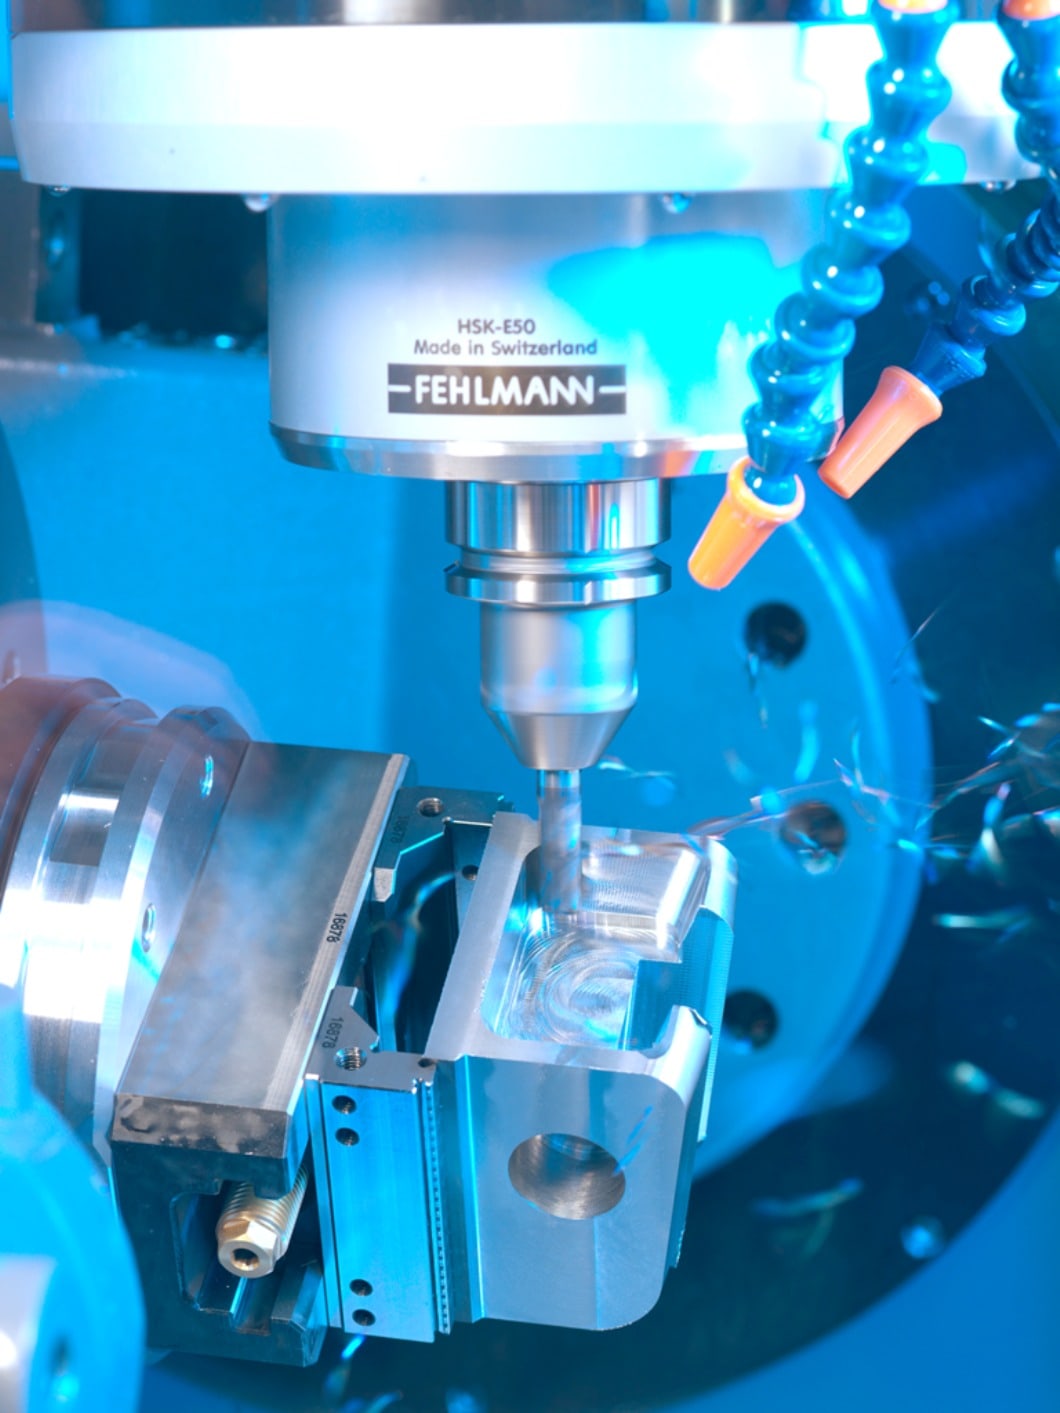 Highly dynamic 5-axis milling - the rotary swivelling table is driven by cooled torque drives